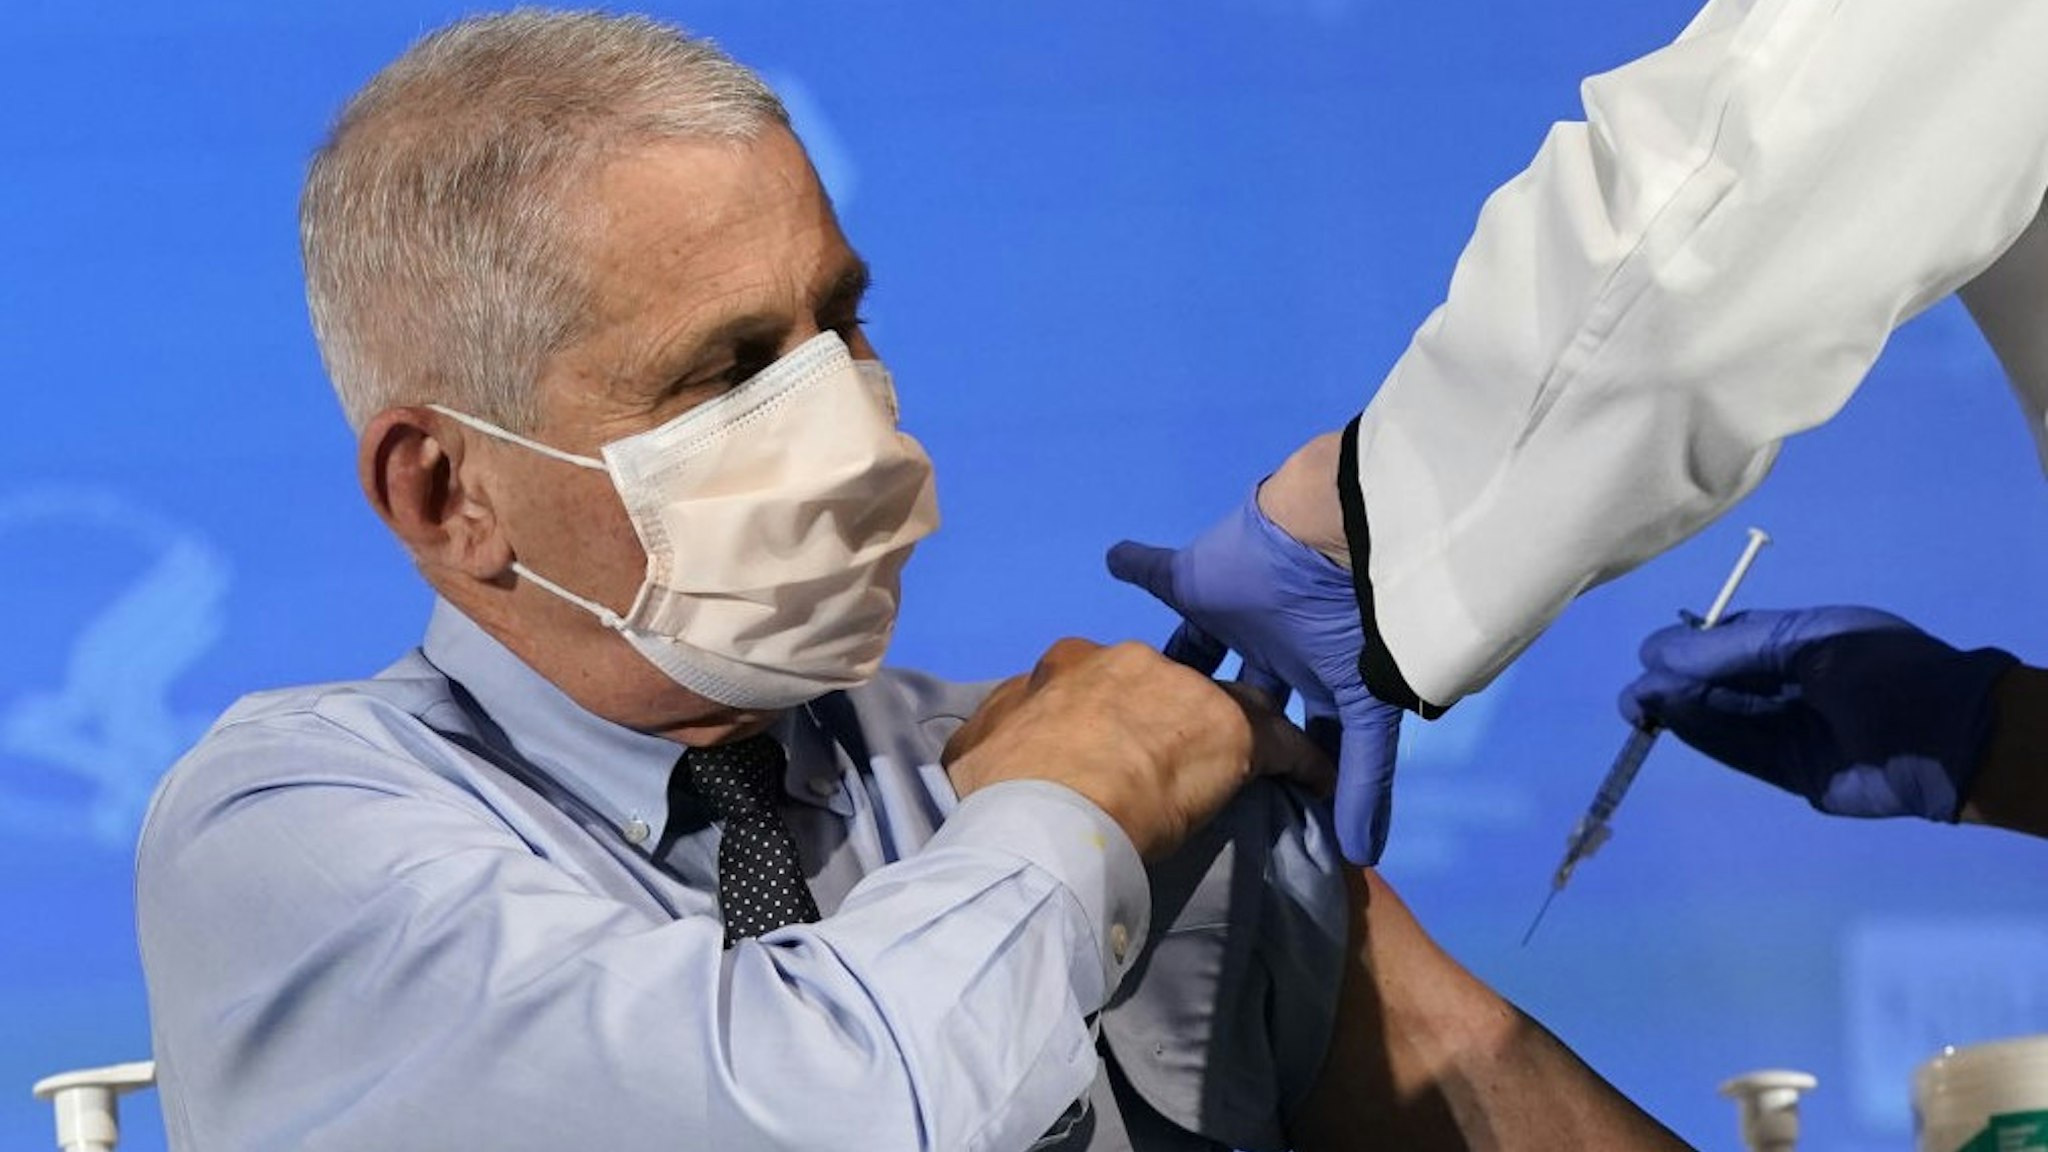 Anthony Fauci, director of the National Institute of Allergy and Infectious Diseases, receives the Moderna Inc. Covid-19 vaccine during an event at the NIH Clinical Center Masur Auditorium in Bethesda, Maryland, U.S., on Tuesday, Dec, 22, 2020. The National Institutes of Health is holding a livestreamed vaccination event to kick-off the organization's efforts for its employees on the front line of the pandemic. Photographer: